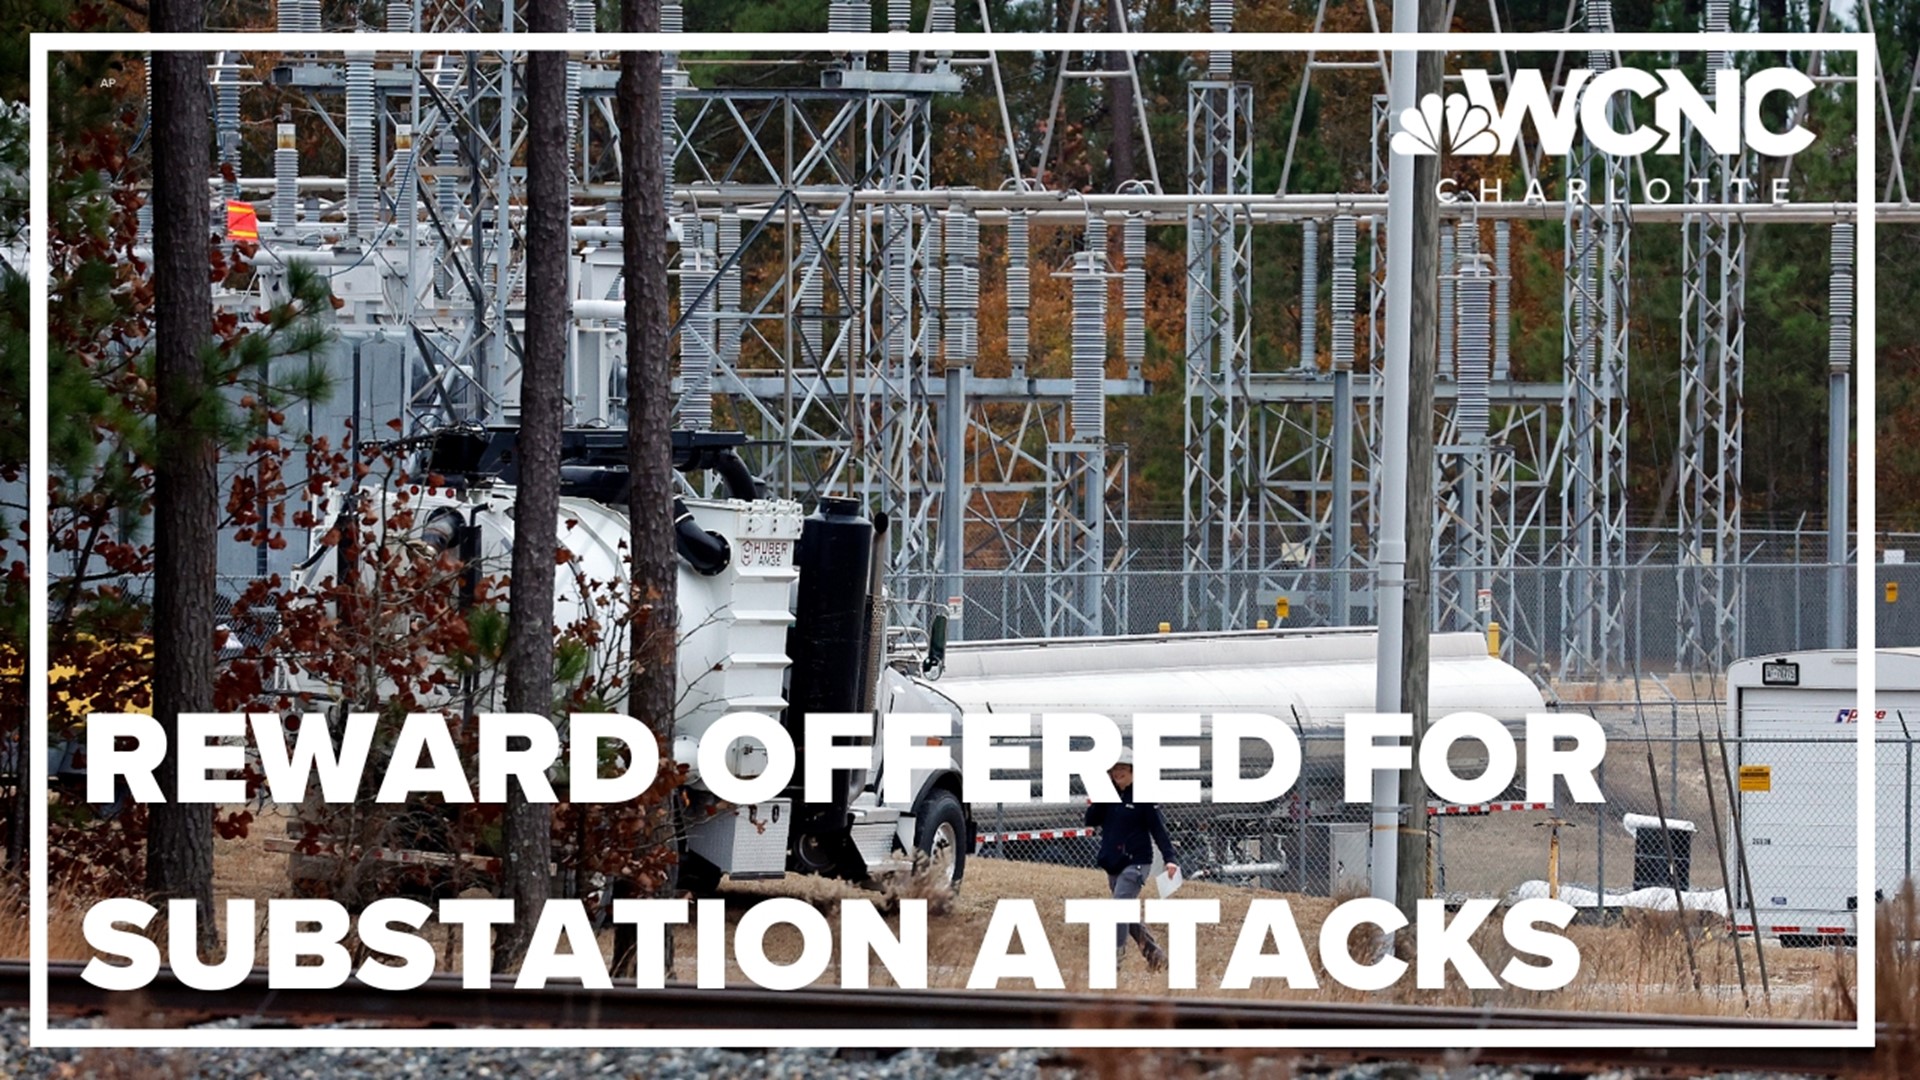 Agents are still working to find out who shot at substations in Moore and Randolph Counties in early January.